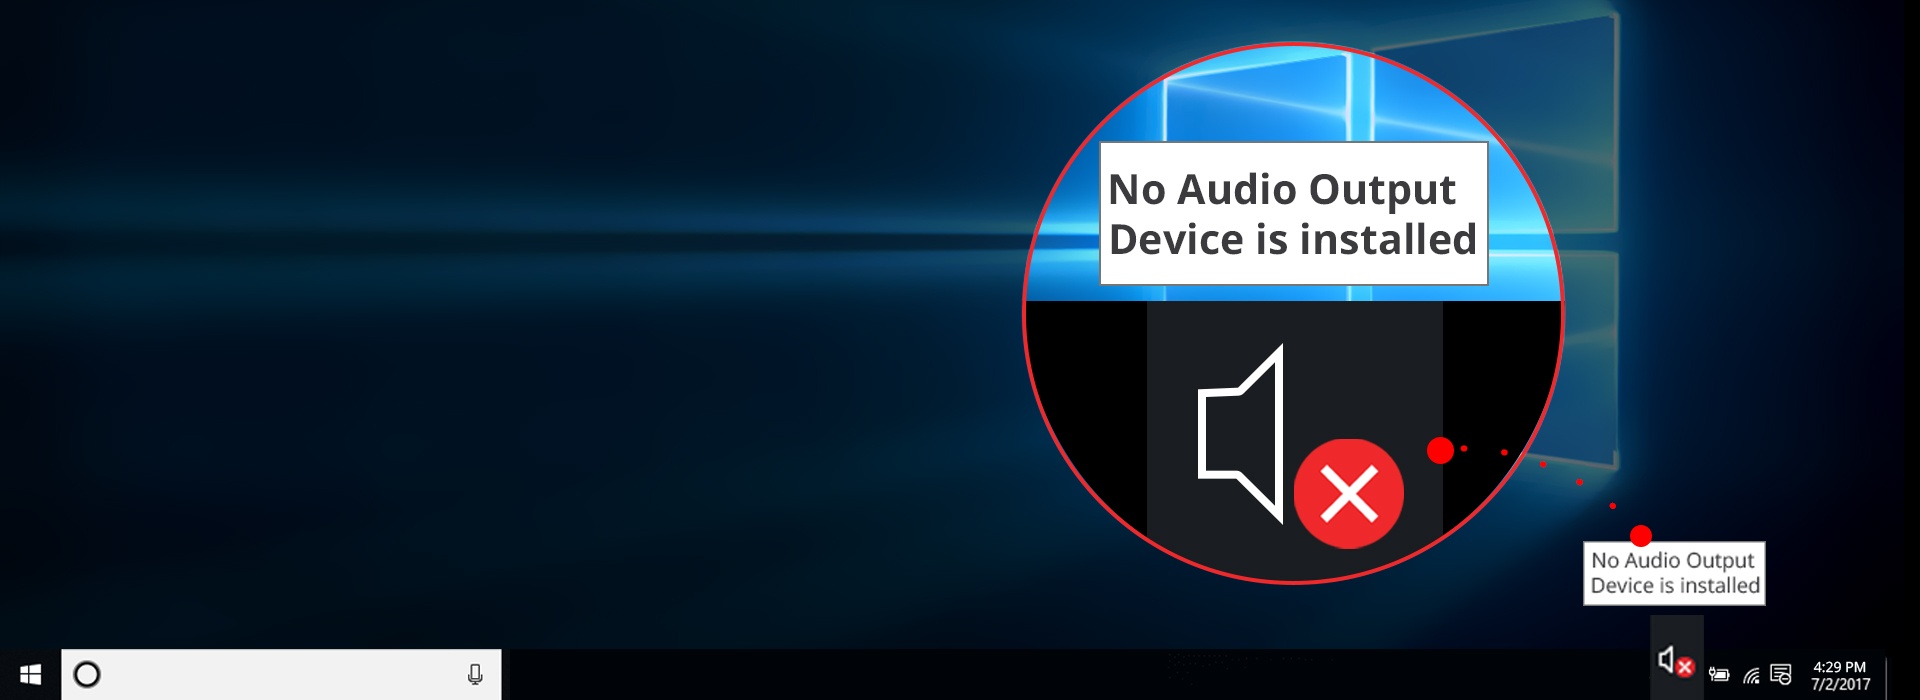 dell audio output device install